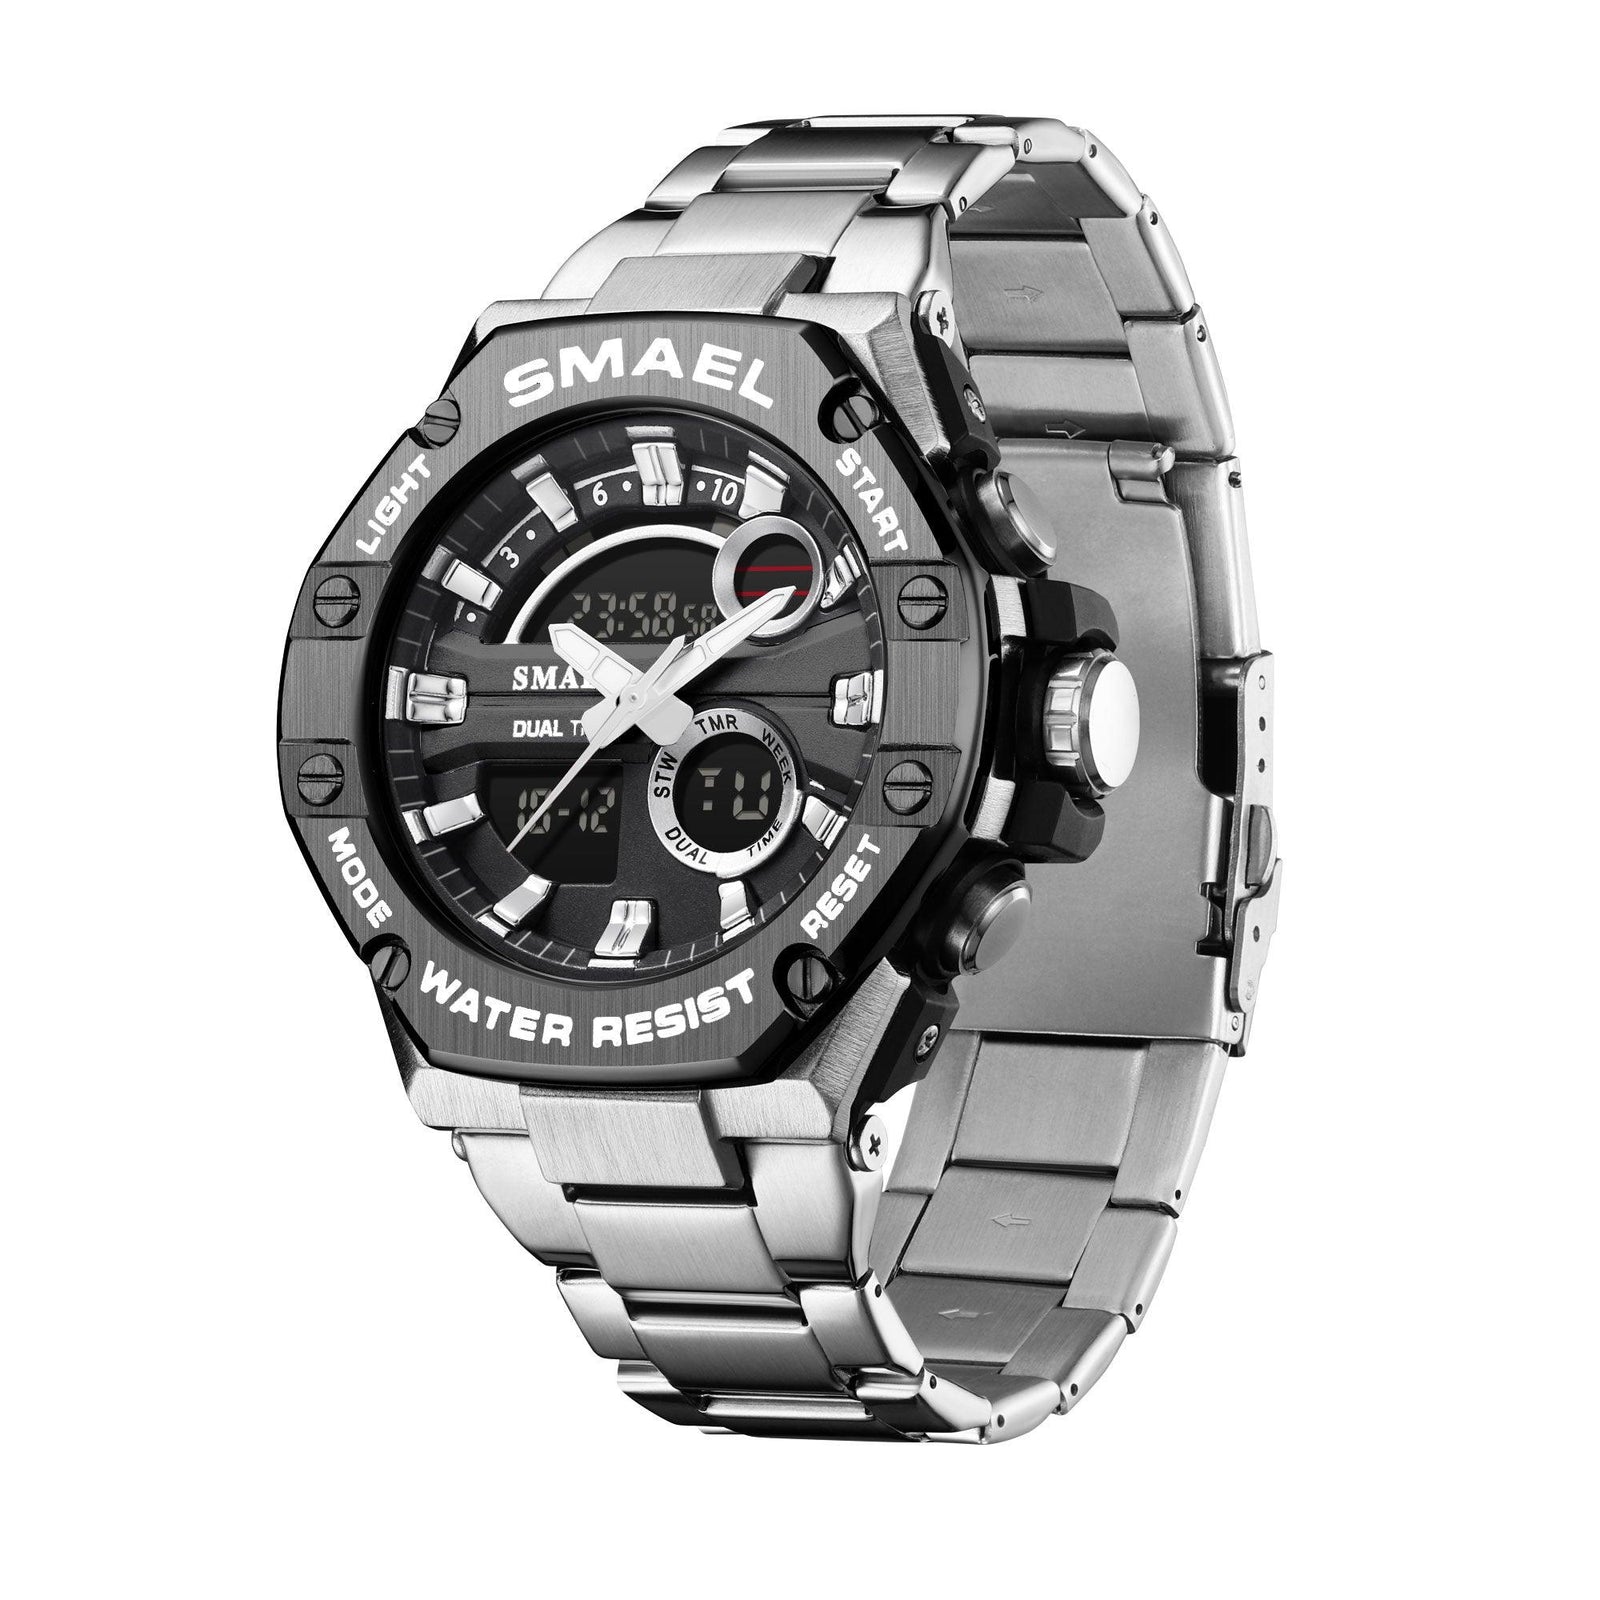 Smael 8090 Stainless Steel Watch - Silver/Black